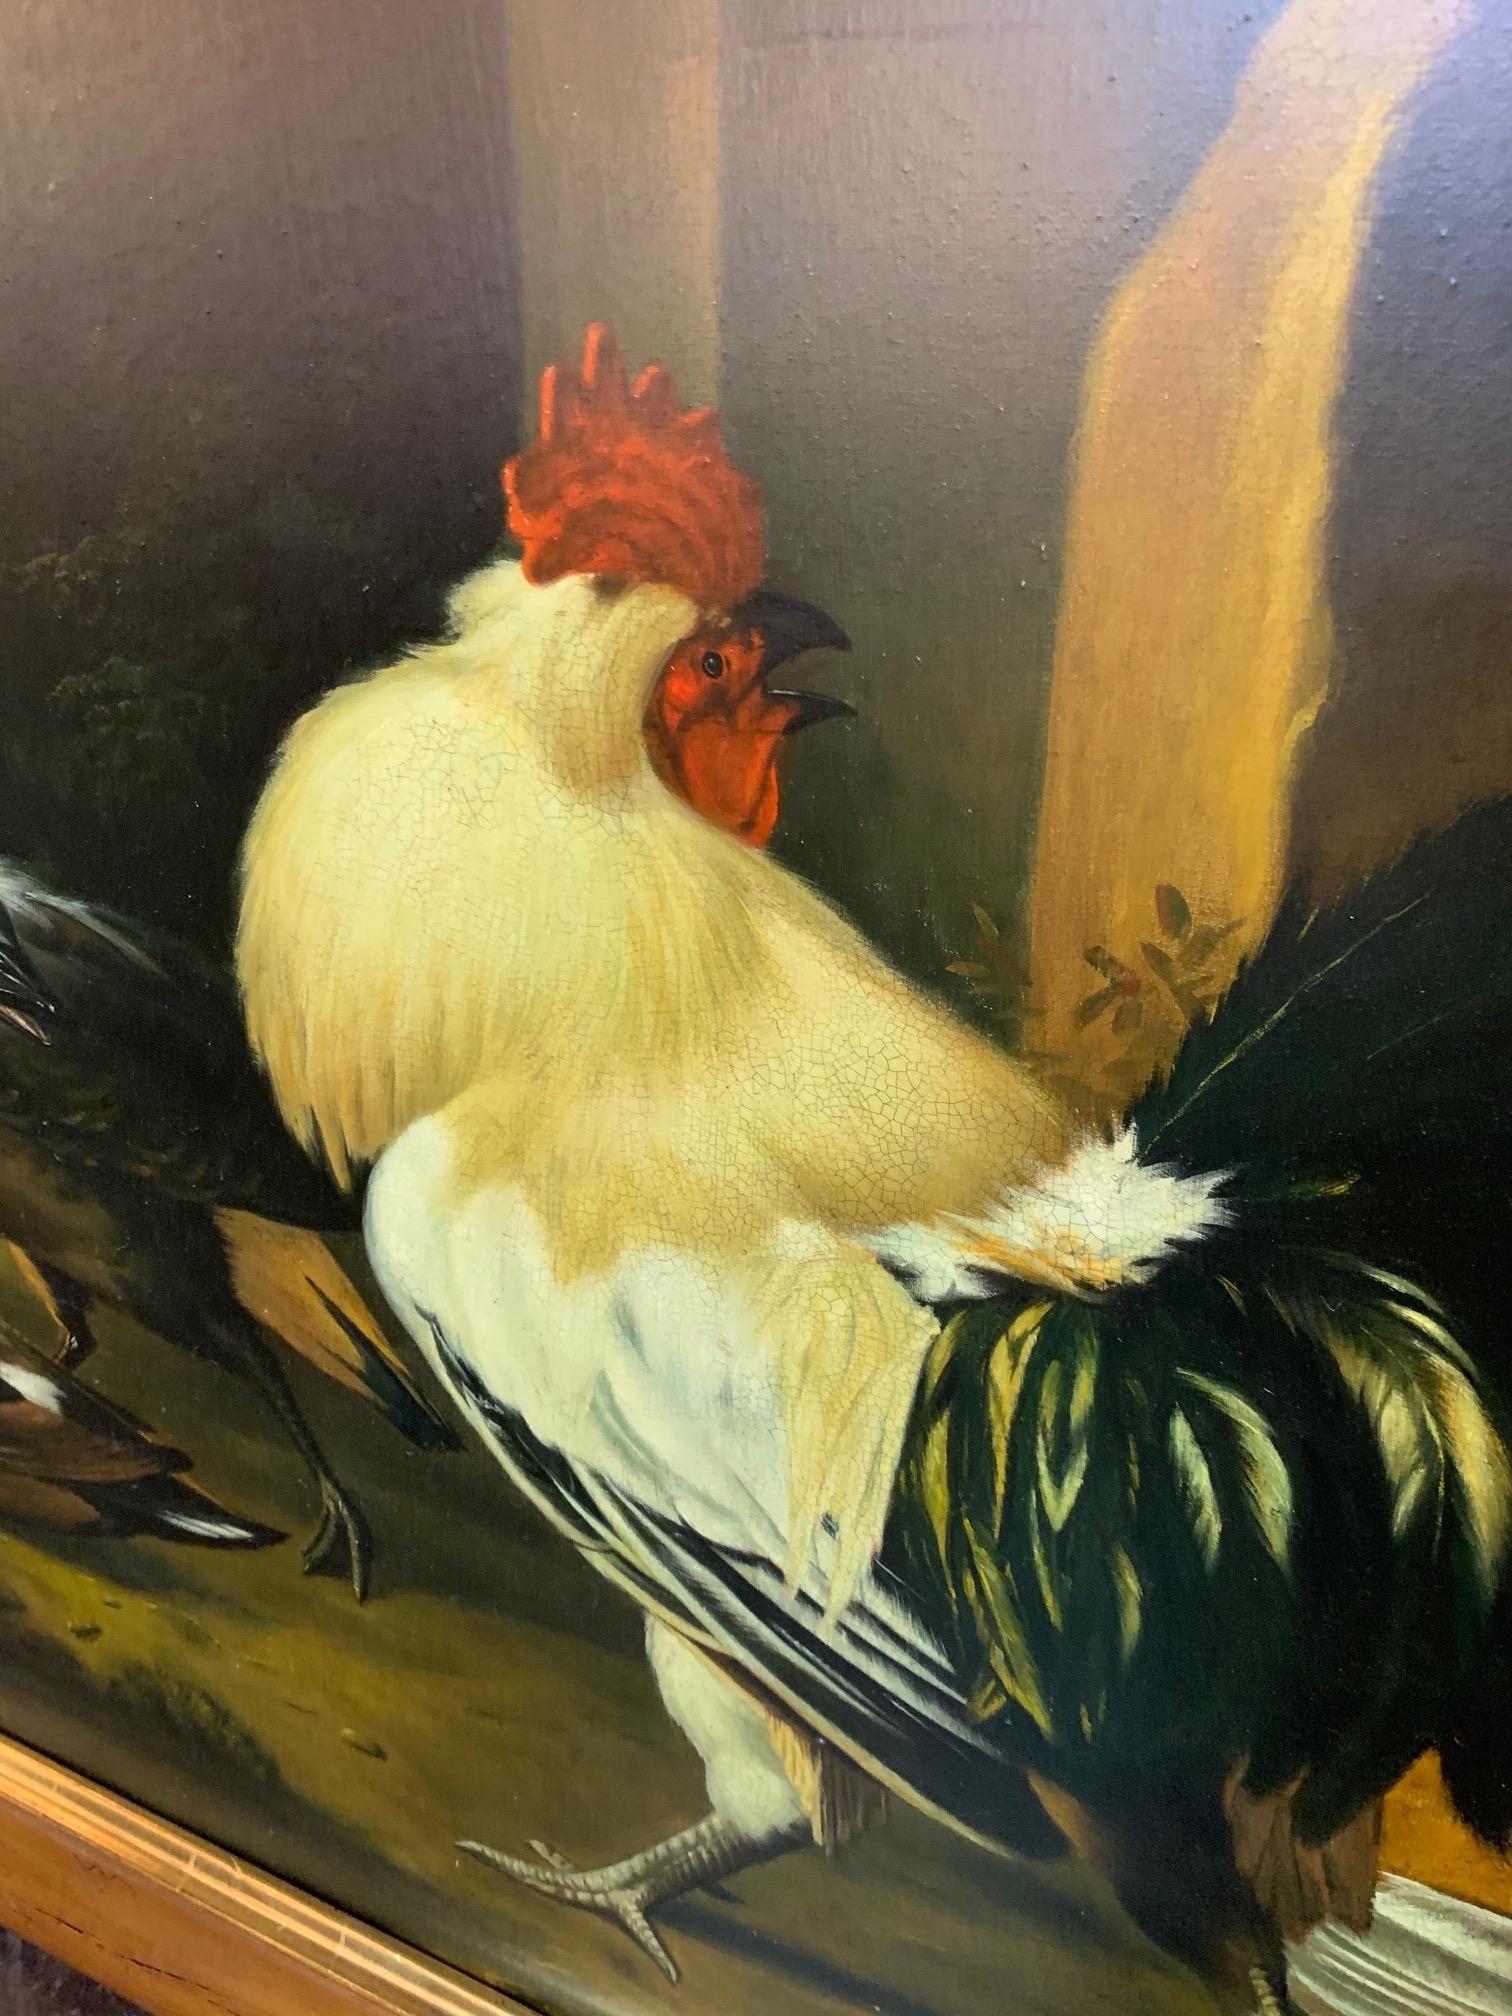 Painted Large Scale European Oil on Canvas Painting of Chickens and Roosters For Sale